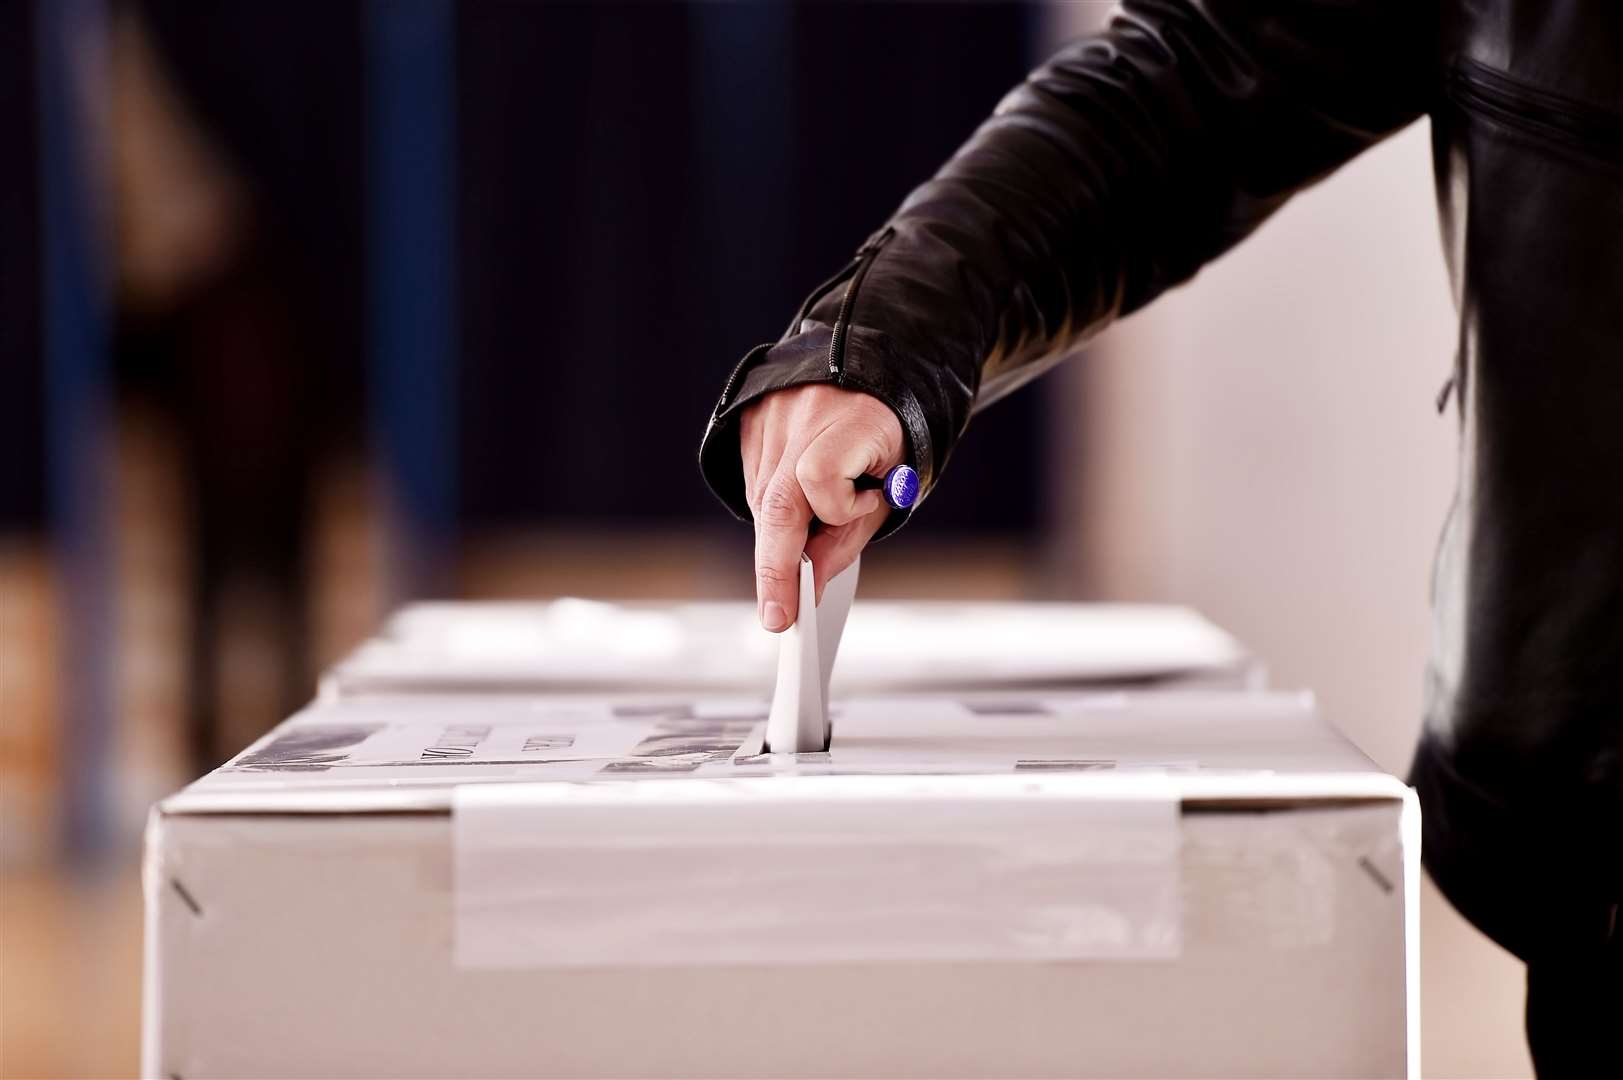 Young people are urged to find out how to make use of their right to vote.